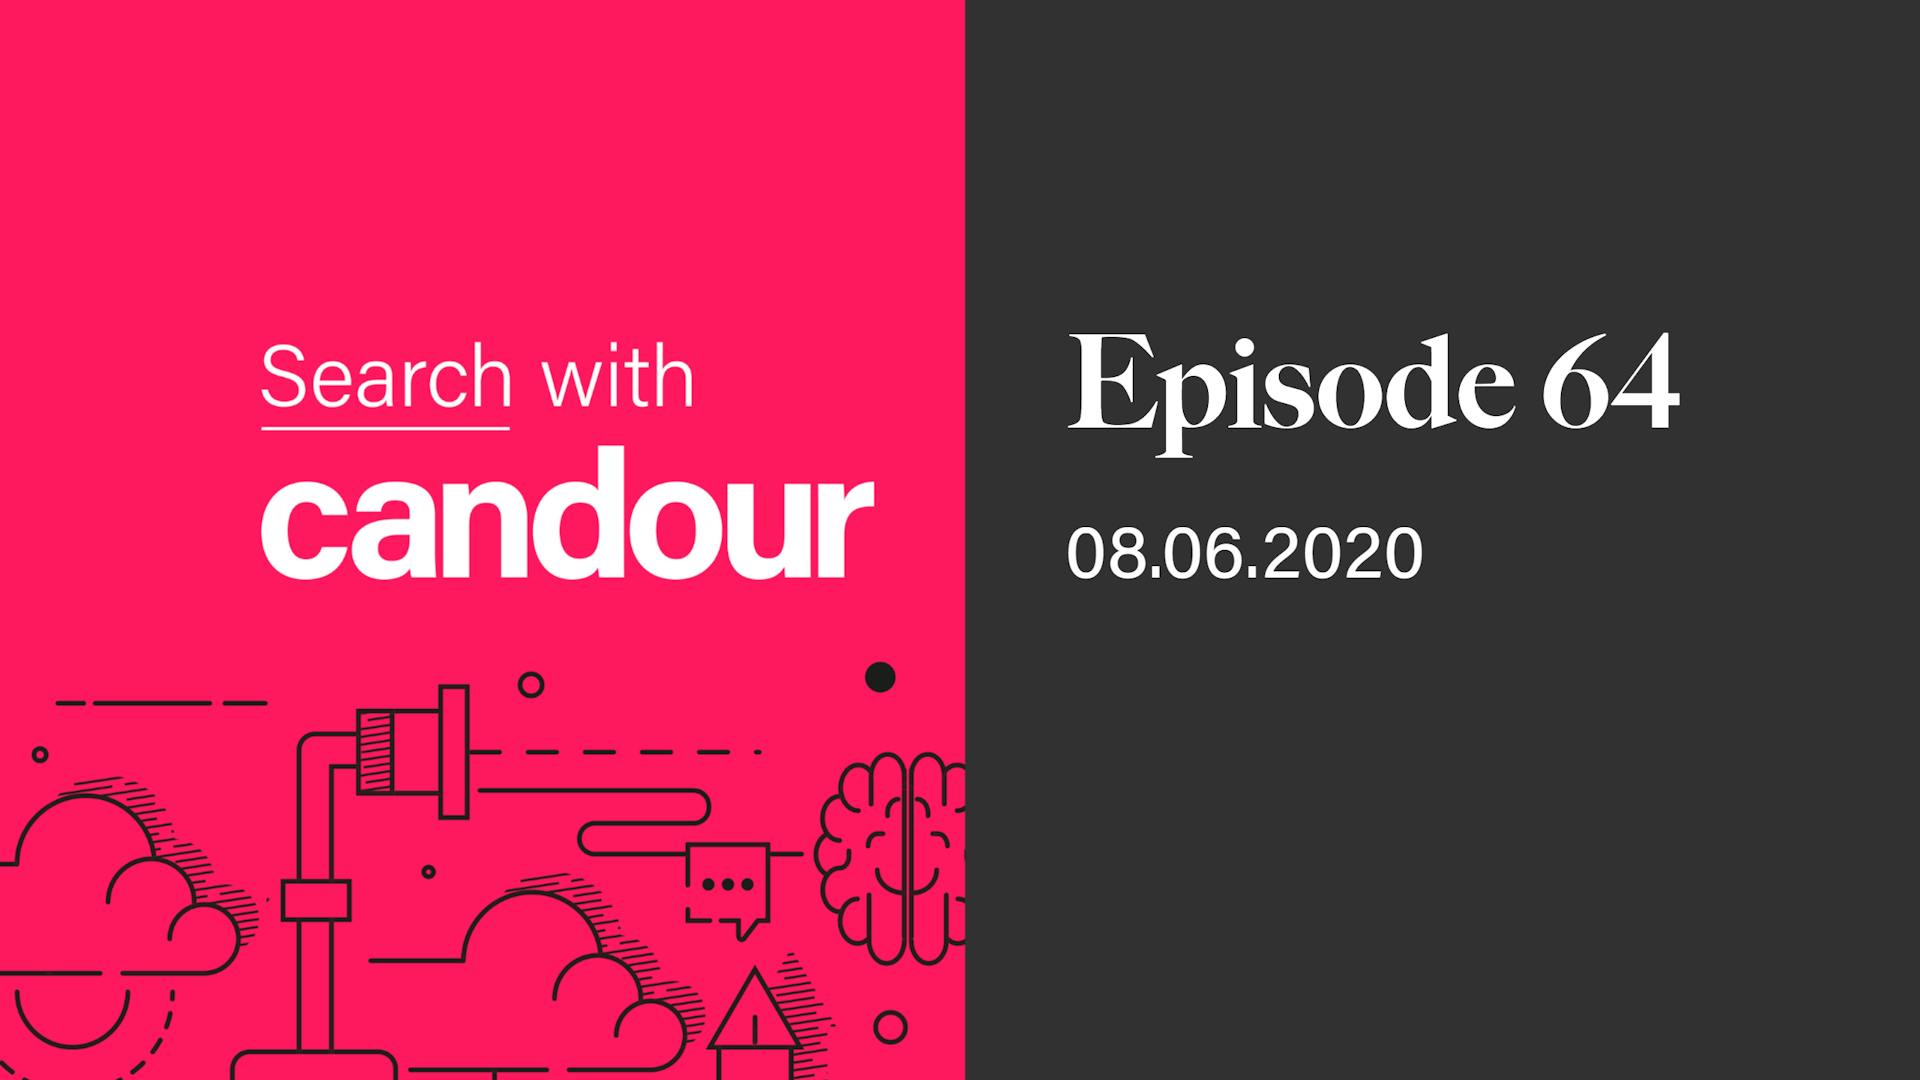 Episode 64 - Search with Candour